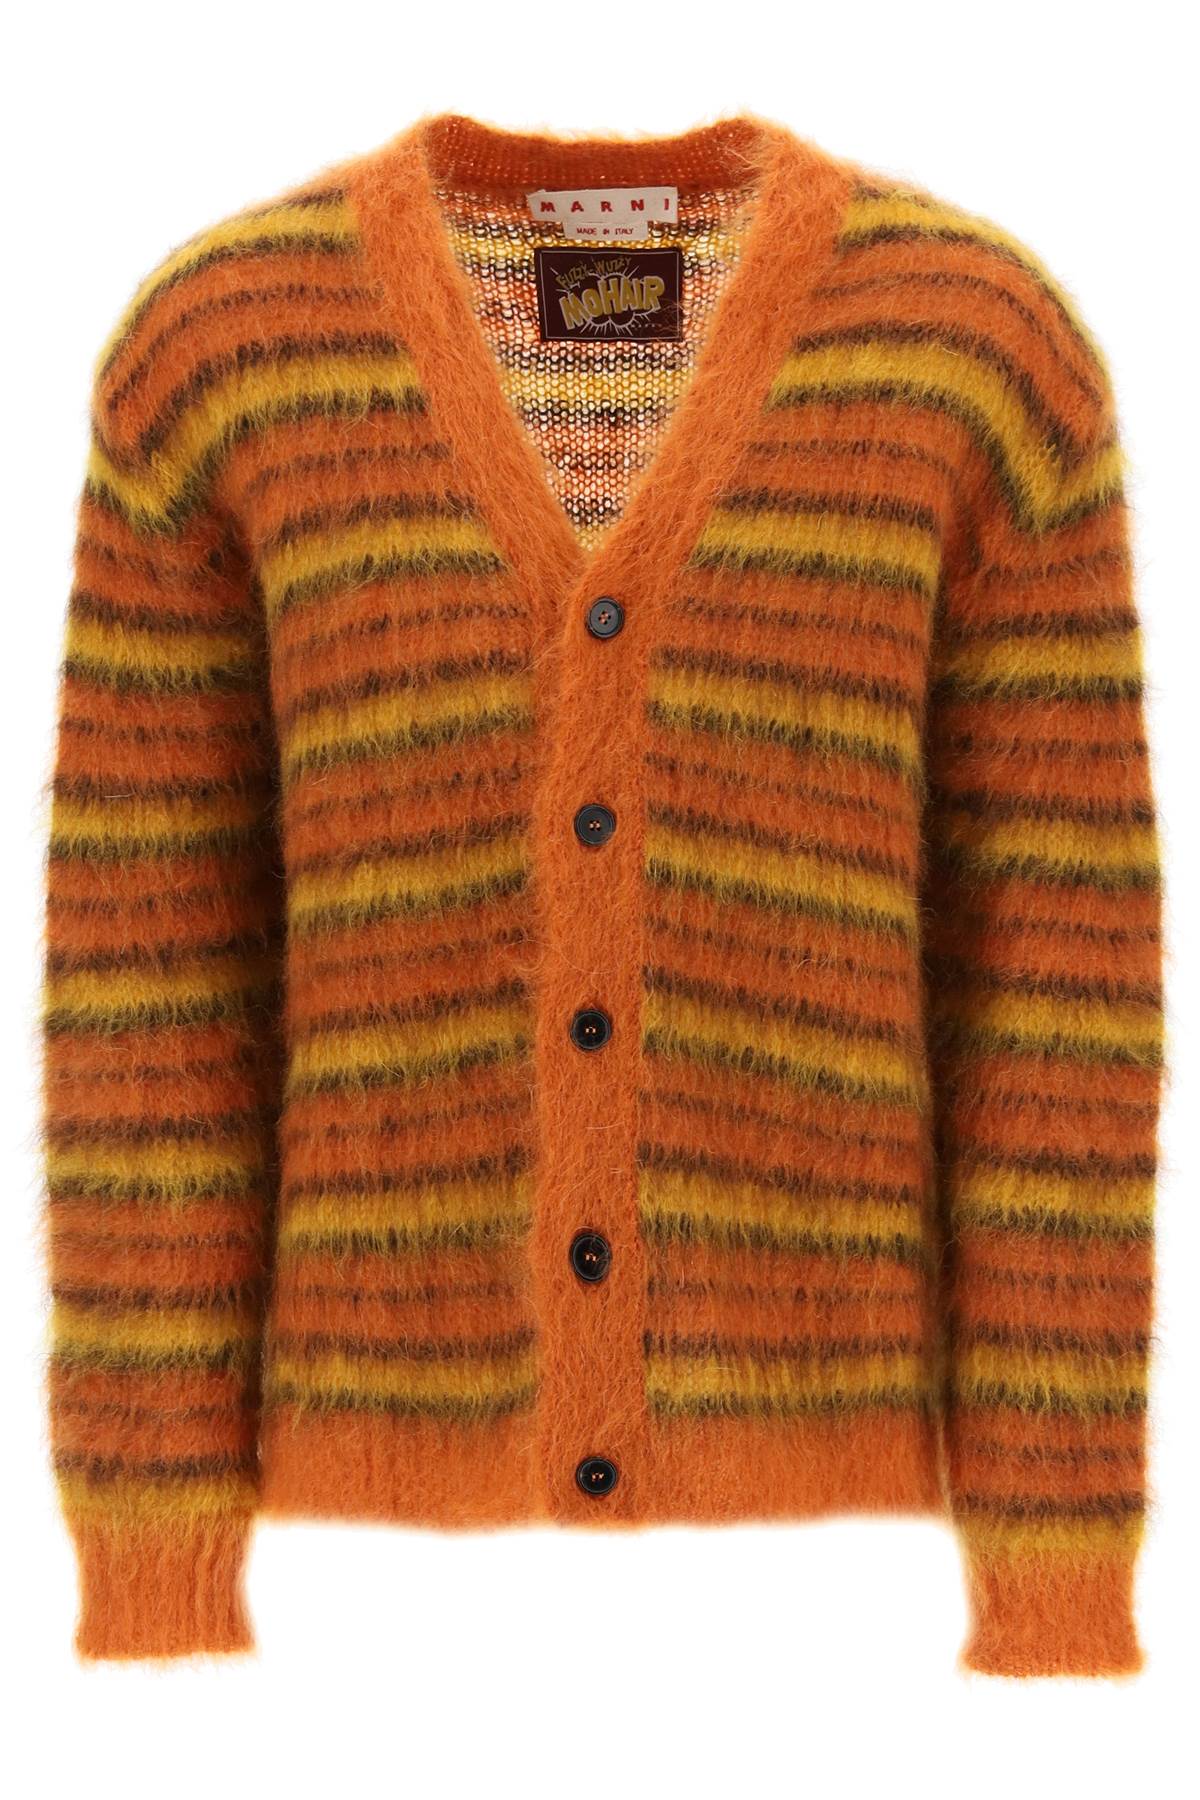 Marni cardigan in striped brushed mohair-0